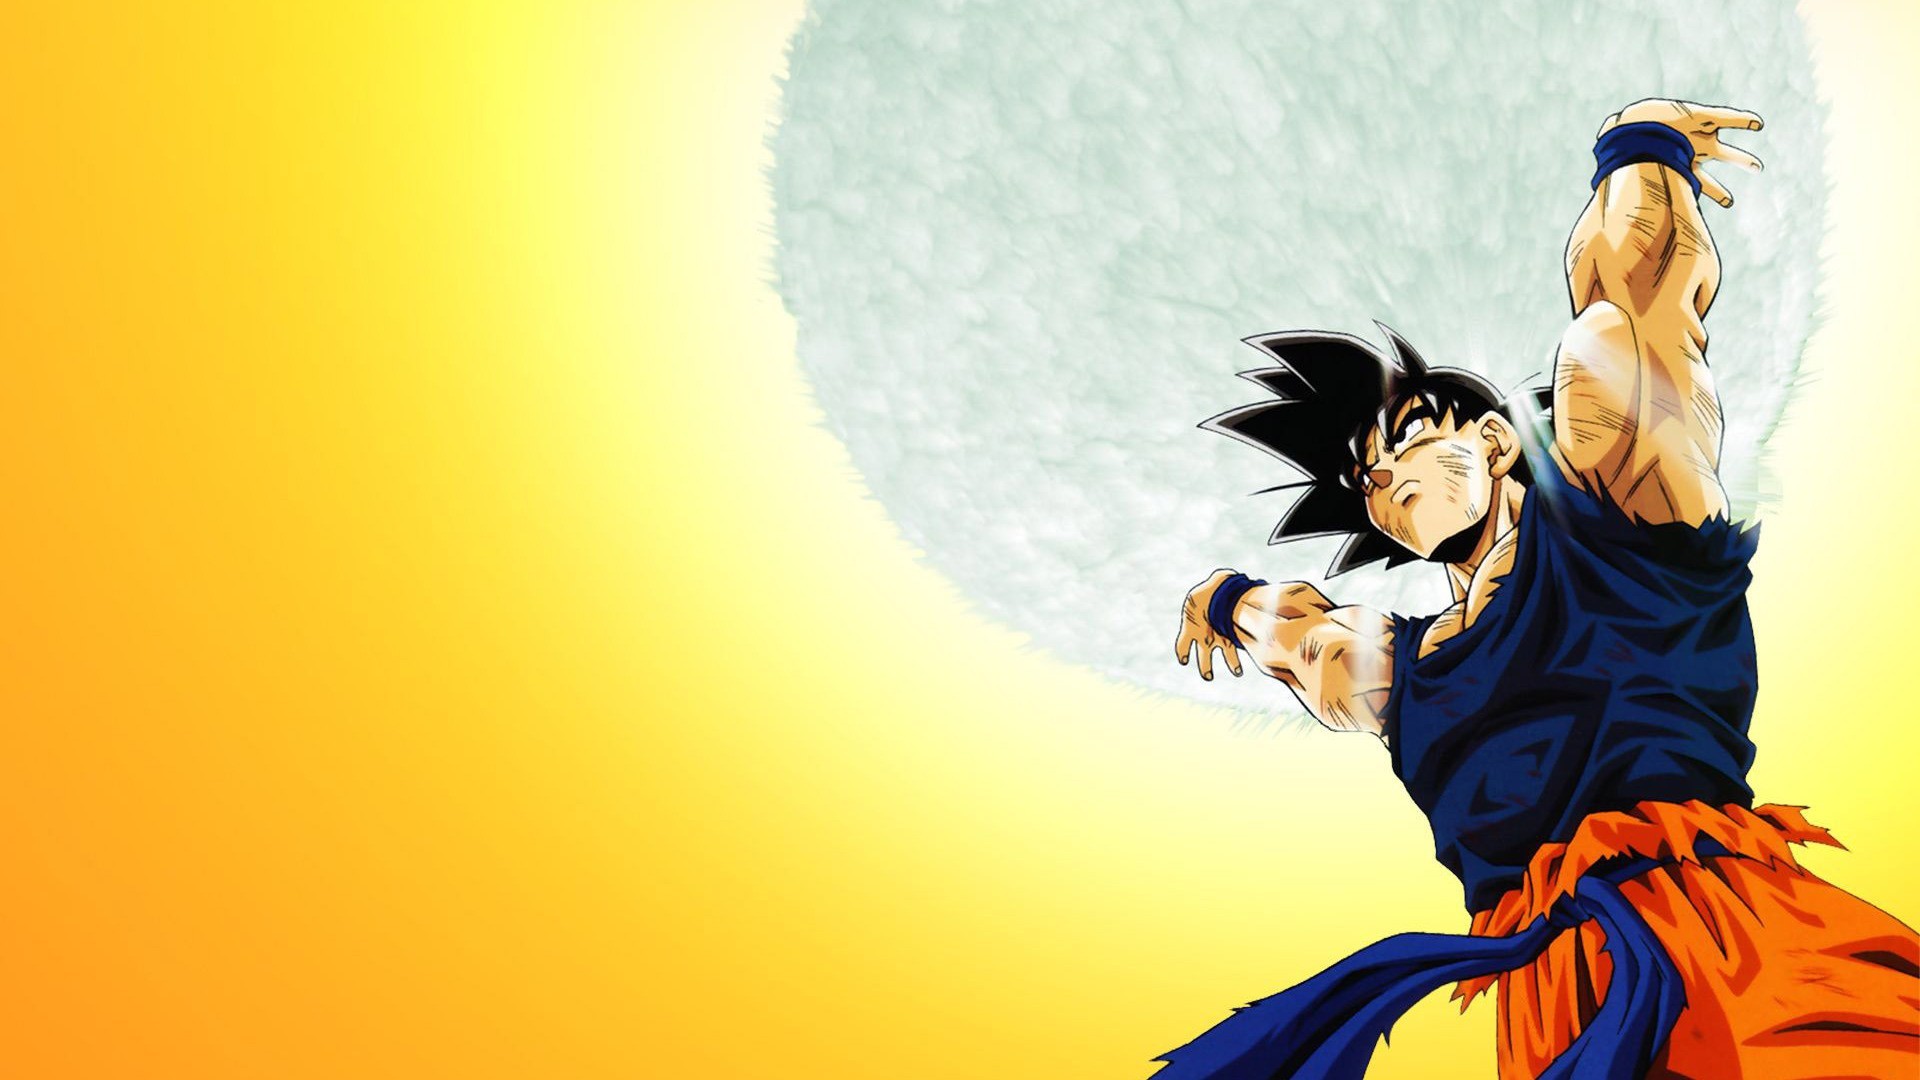 Goku Imagenes Wallpaper For Desktop with image resolution 1920x1080 pixel. You can use this wallpaper as background for your desktop Computer Screensavers, Android or iPhone smartphones